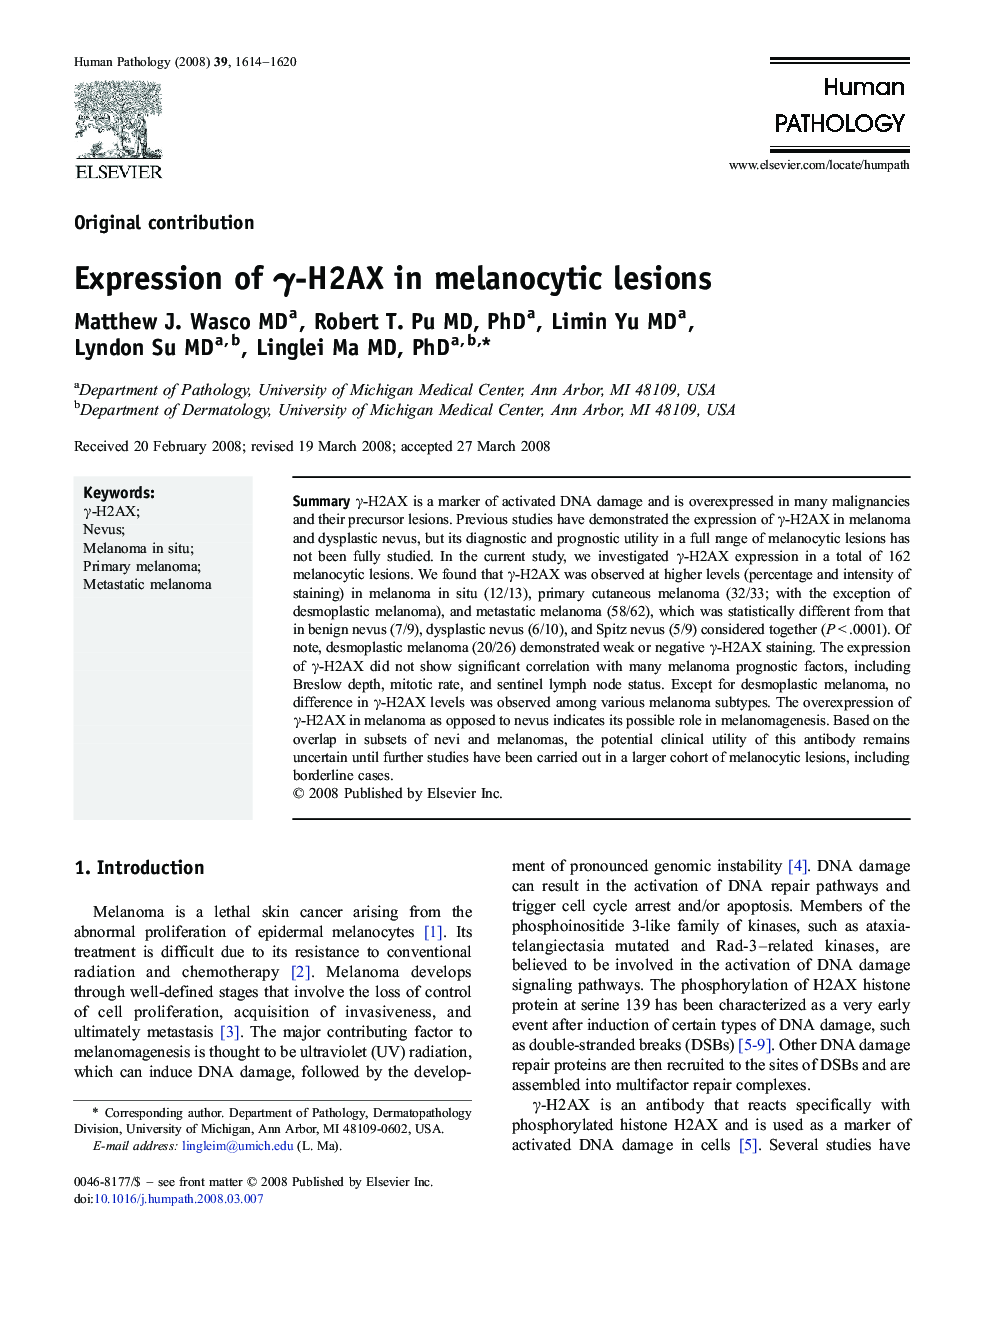 Expression of γ-H2AX in melanocytic lesions